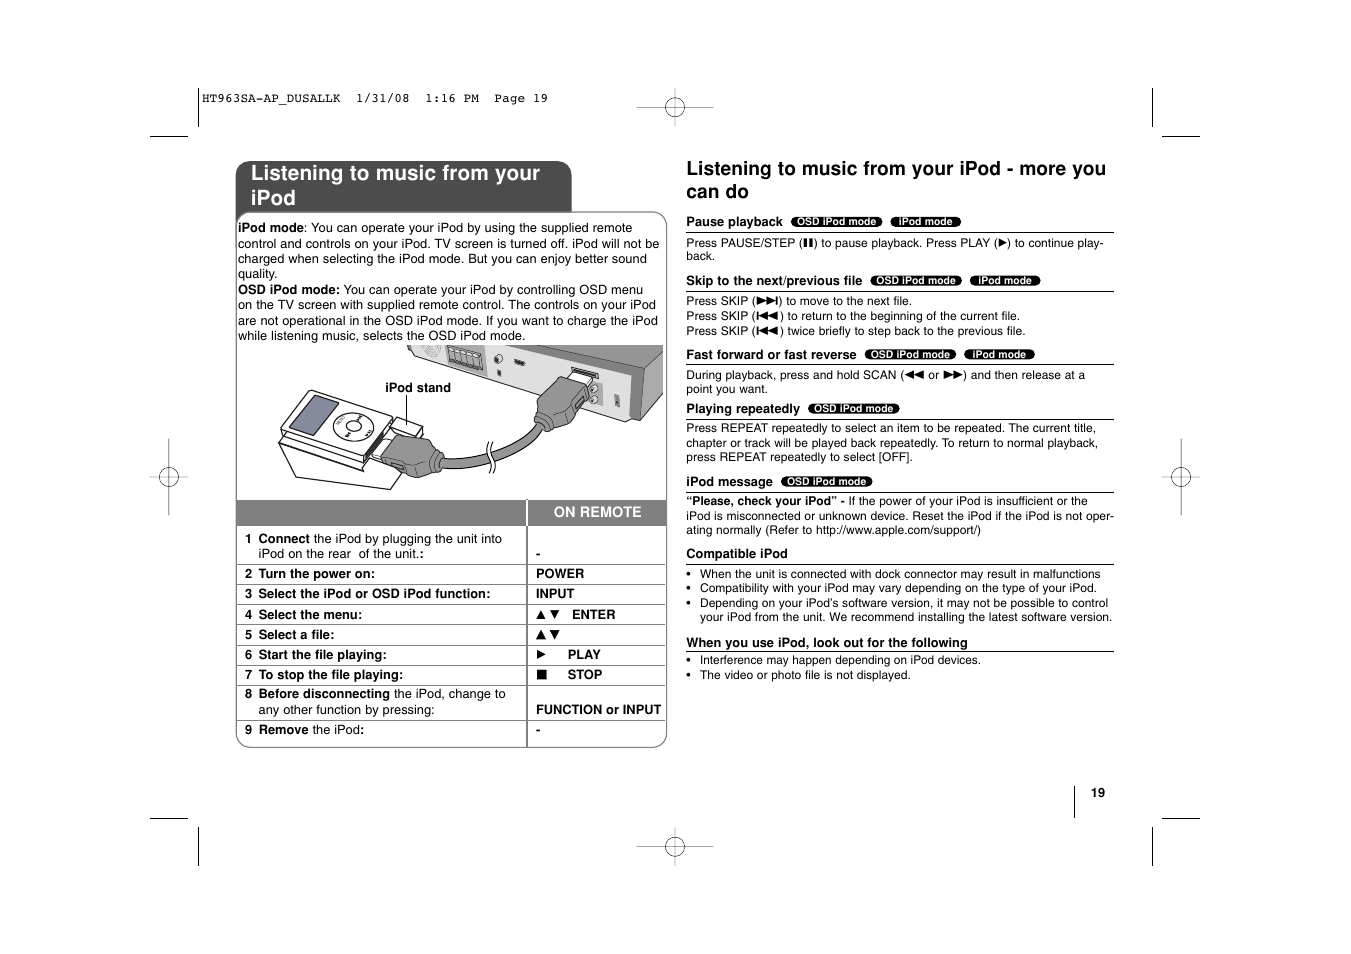 Listening to music from your ipod | LG LHT854 User Manual | Page 19 / 25